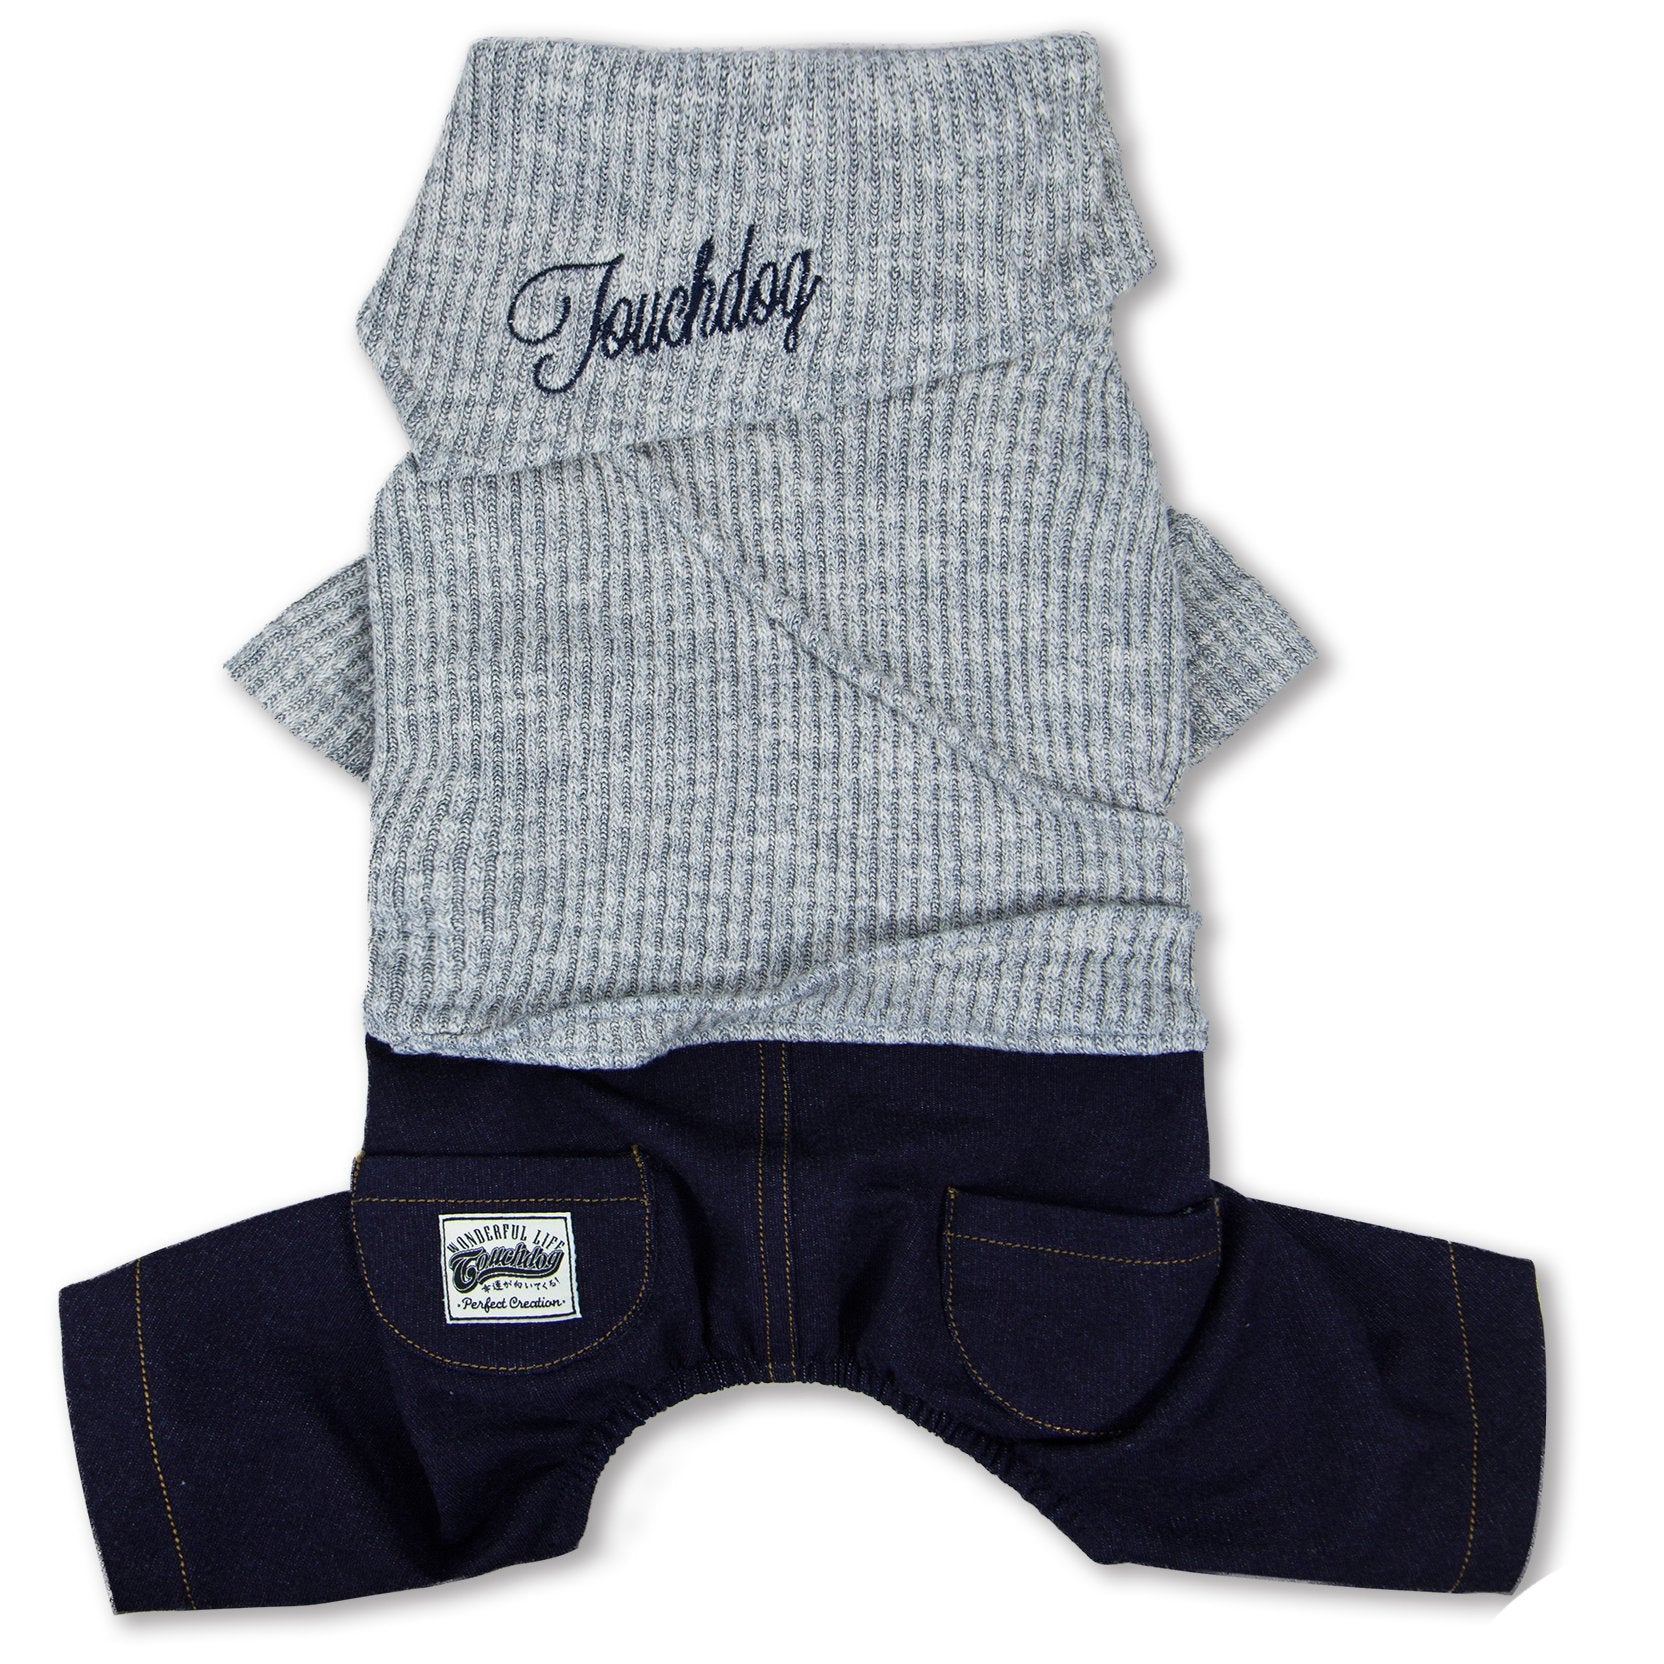 Touchdog Vogue Sweater & Denim Pant Outfit - X-Large - Grey